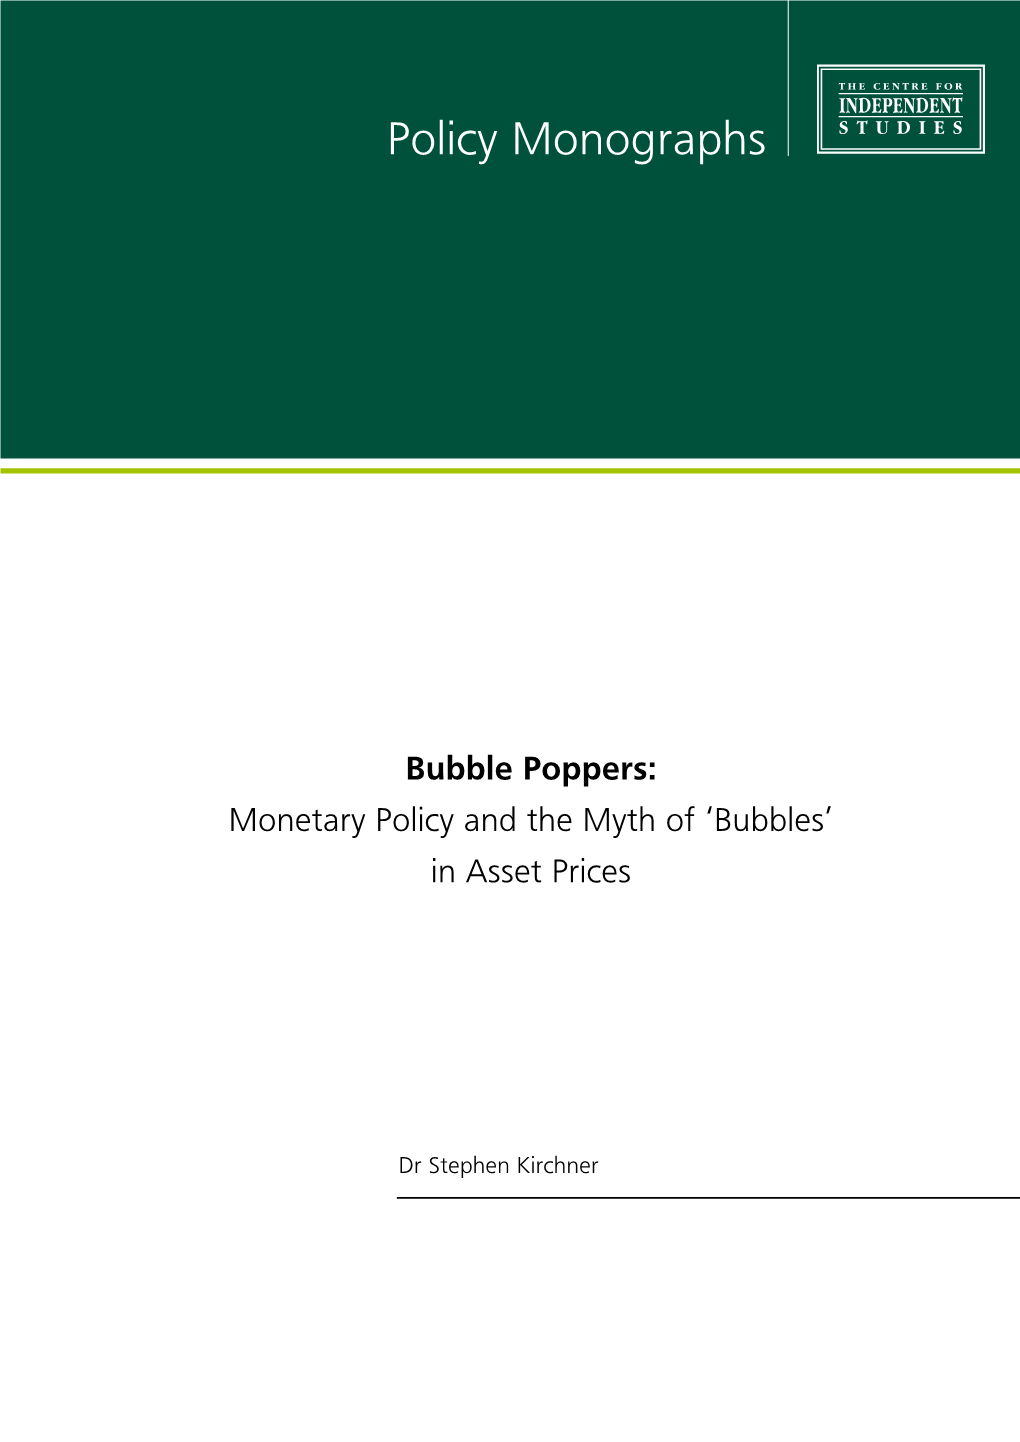 Bubble Poppers: Monetary Policy and the Myth of ‘Bubbles’ in Asset Prices